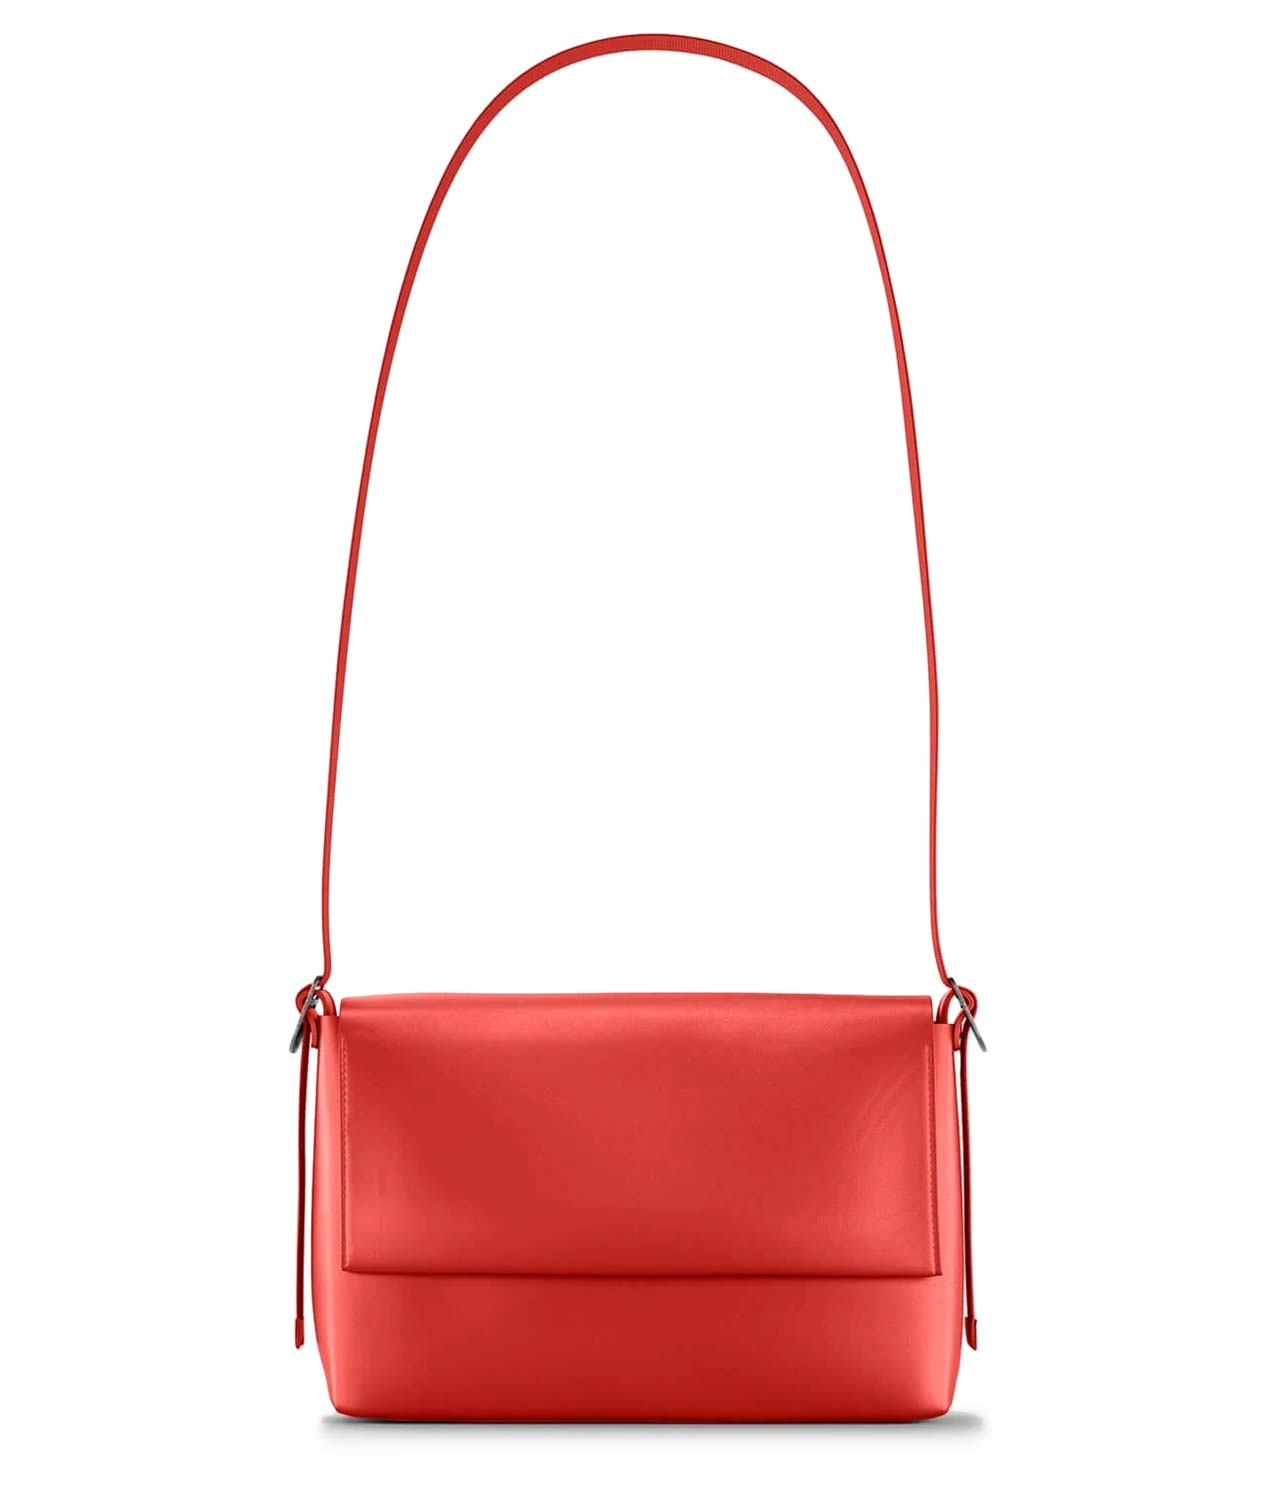 walk-with-me-crossbody-bag-red-2